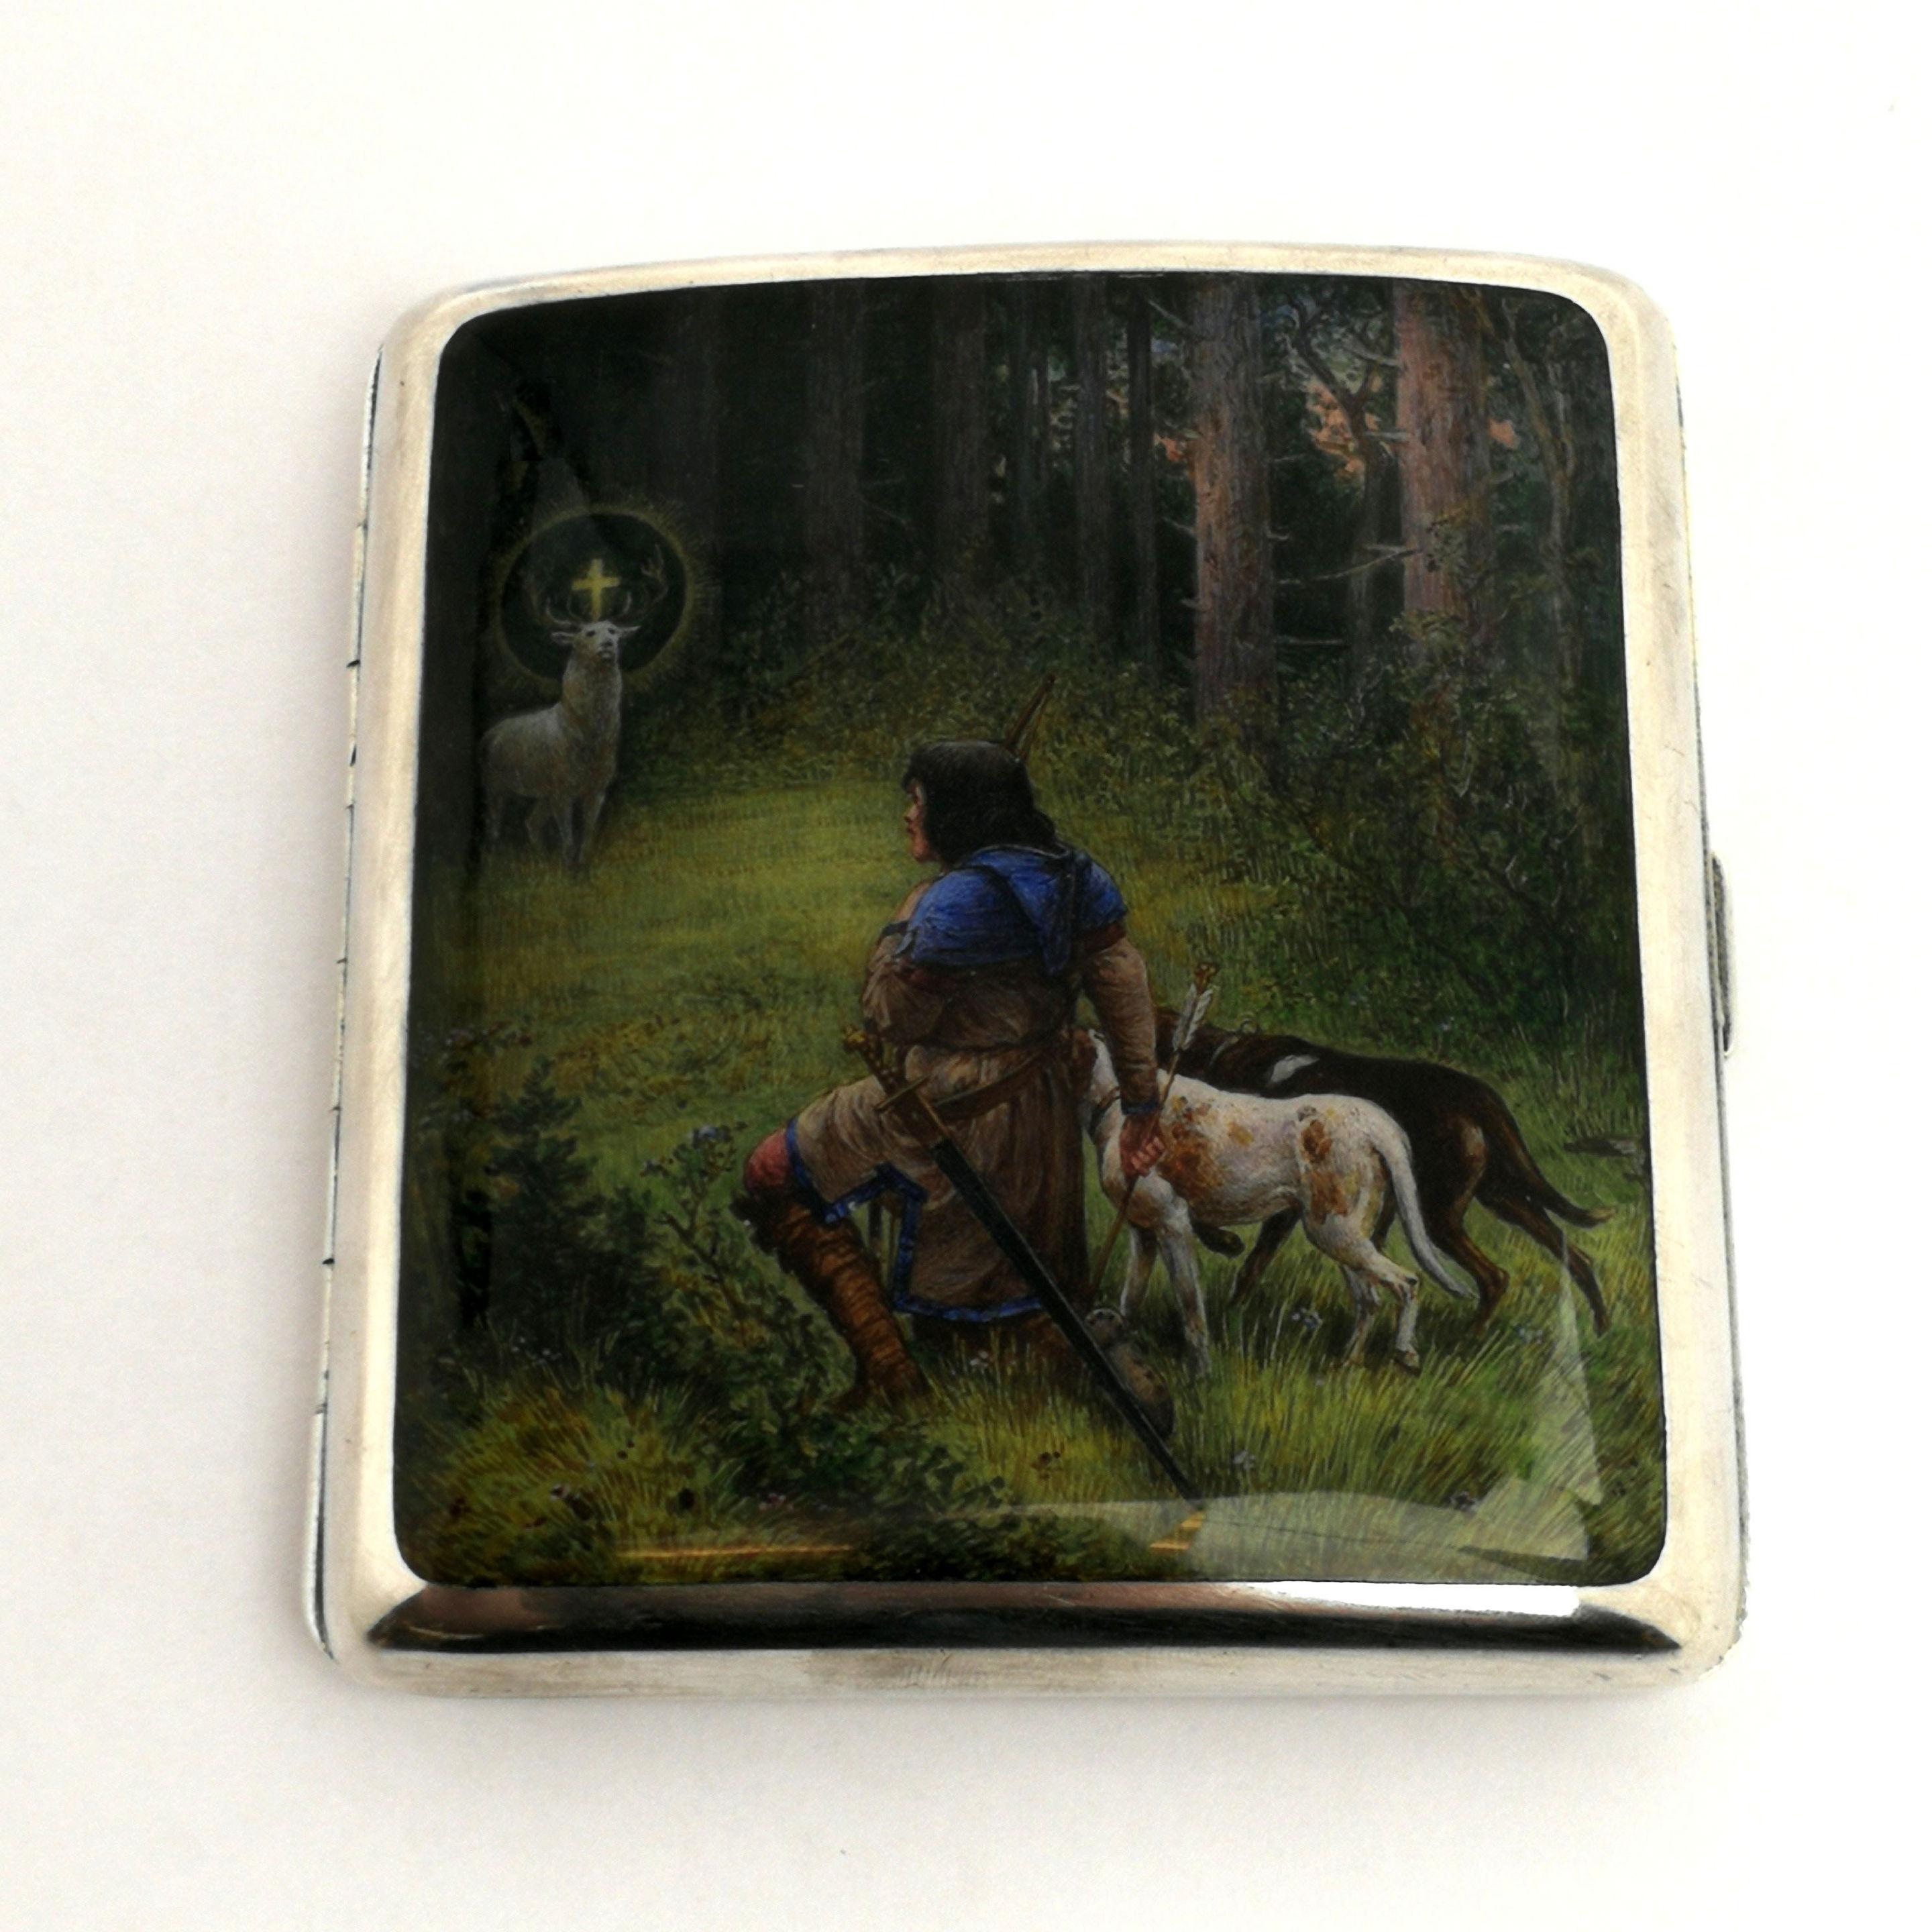 A solid Silver Cigarette Case with a magnificent enamelled image on the front cover. The image is a version of 'The Conversion of Holy Hubertus' by painter Wilhelm Raeuber (1849-1926). This image is created with a careful attention to detail and in